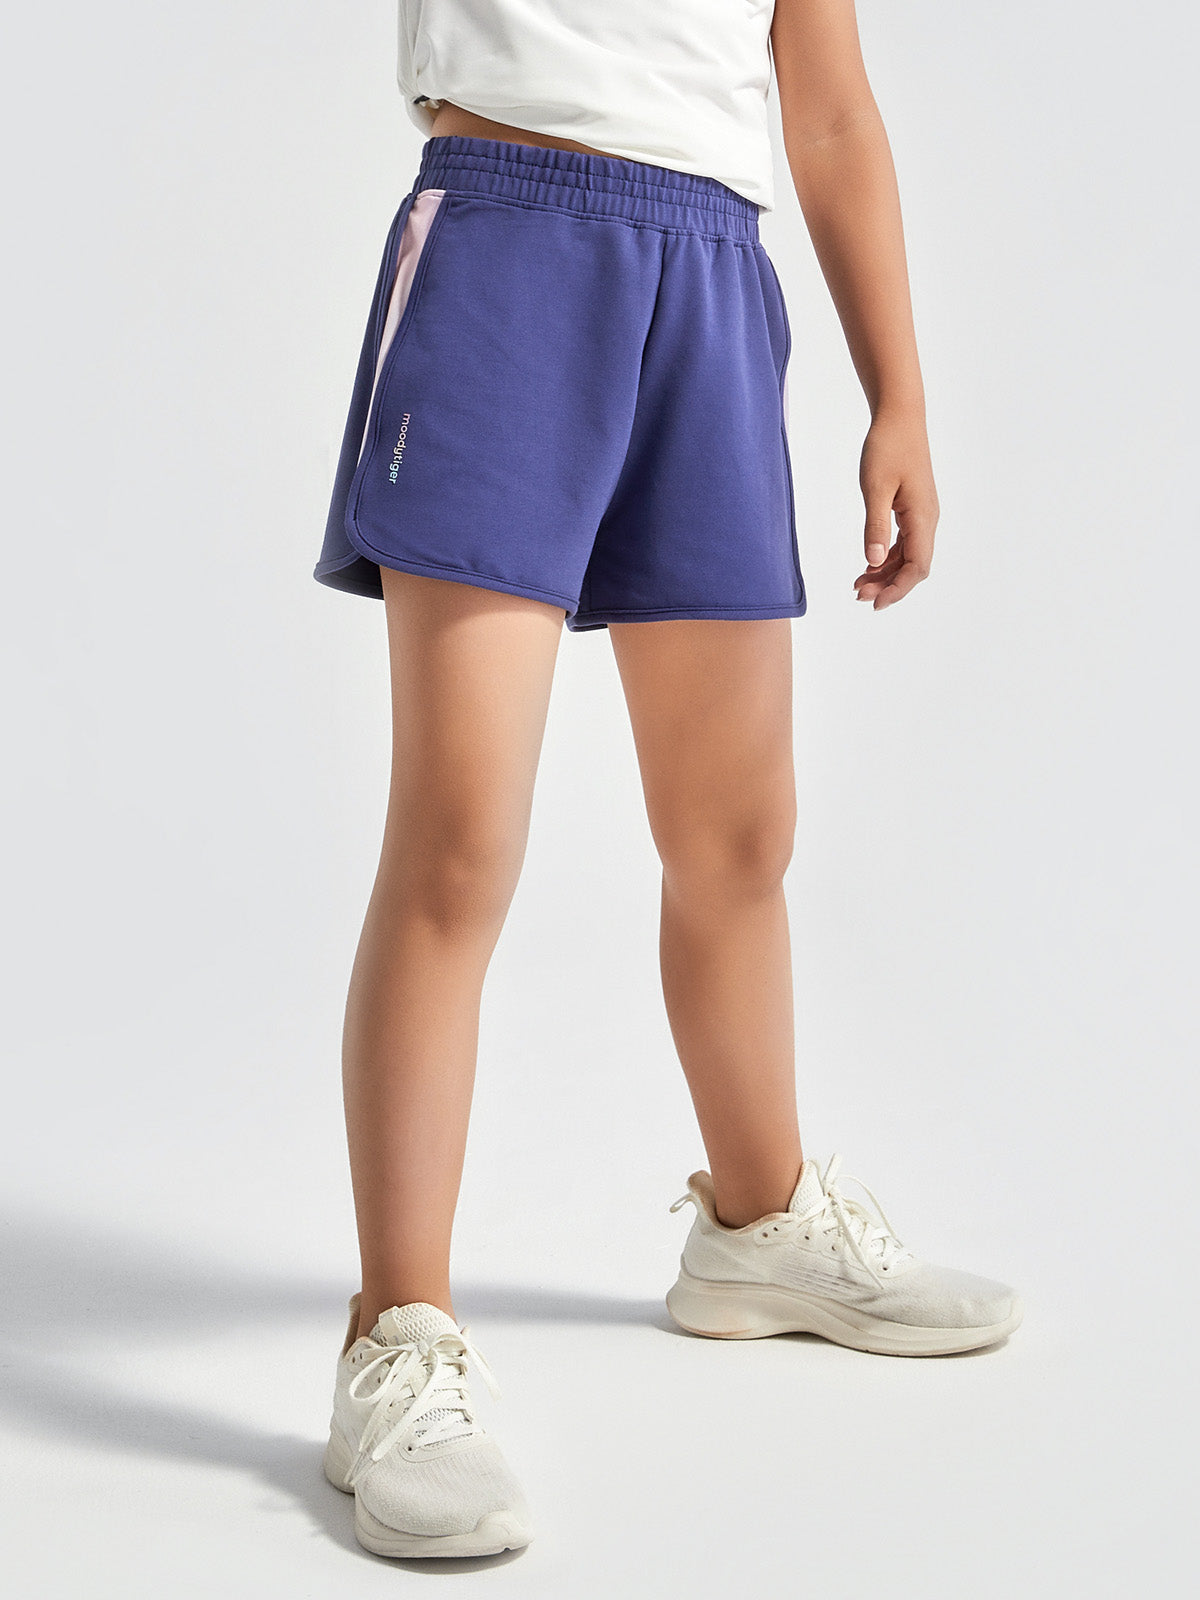 All Play Cotton Stretch Shorts